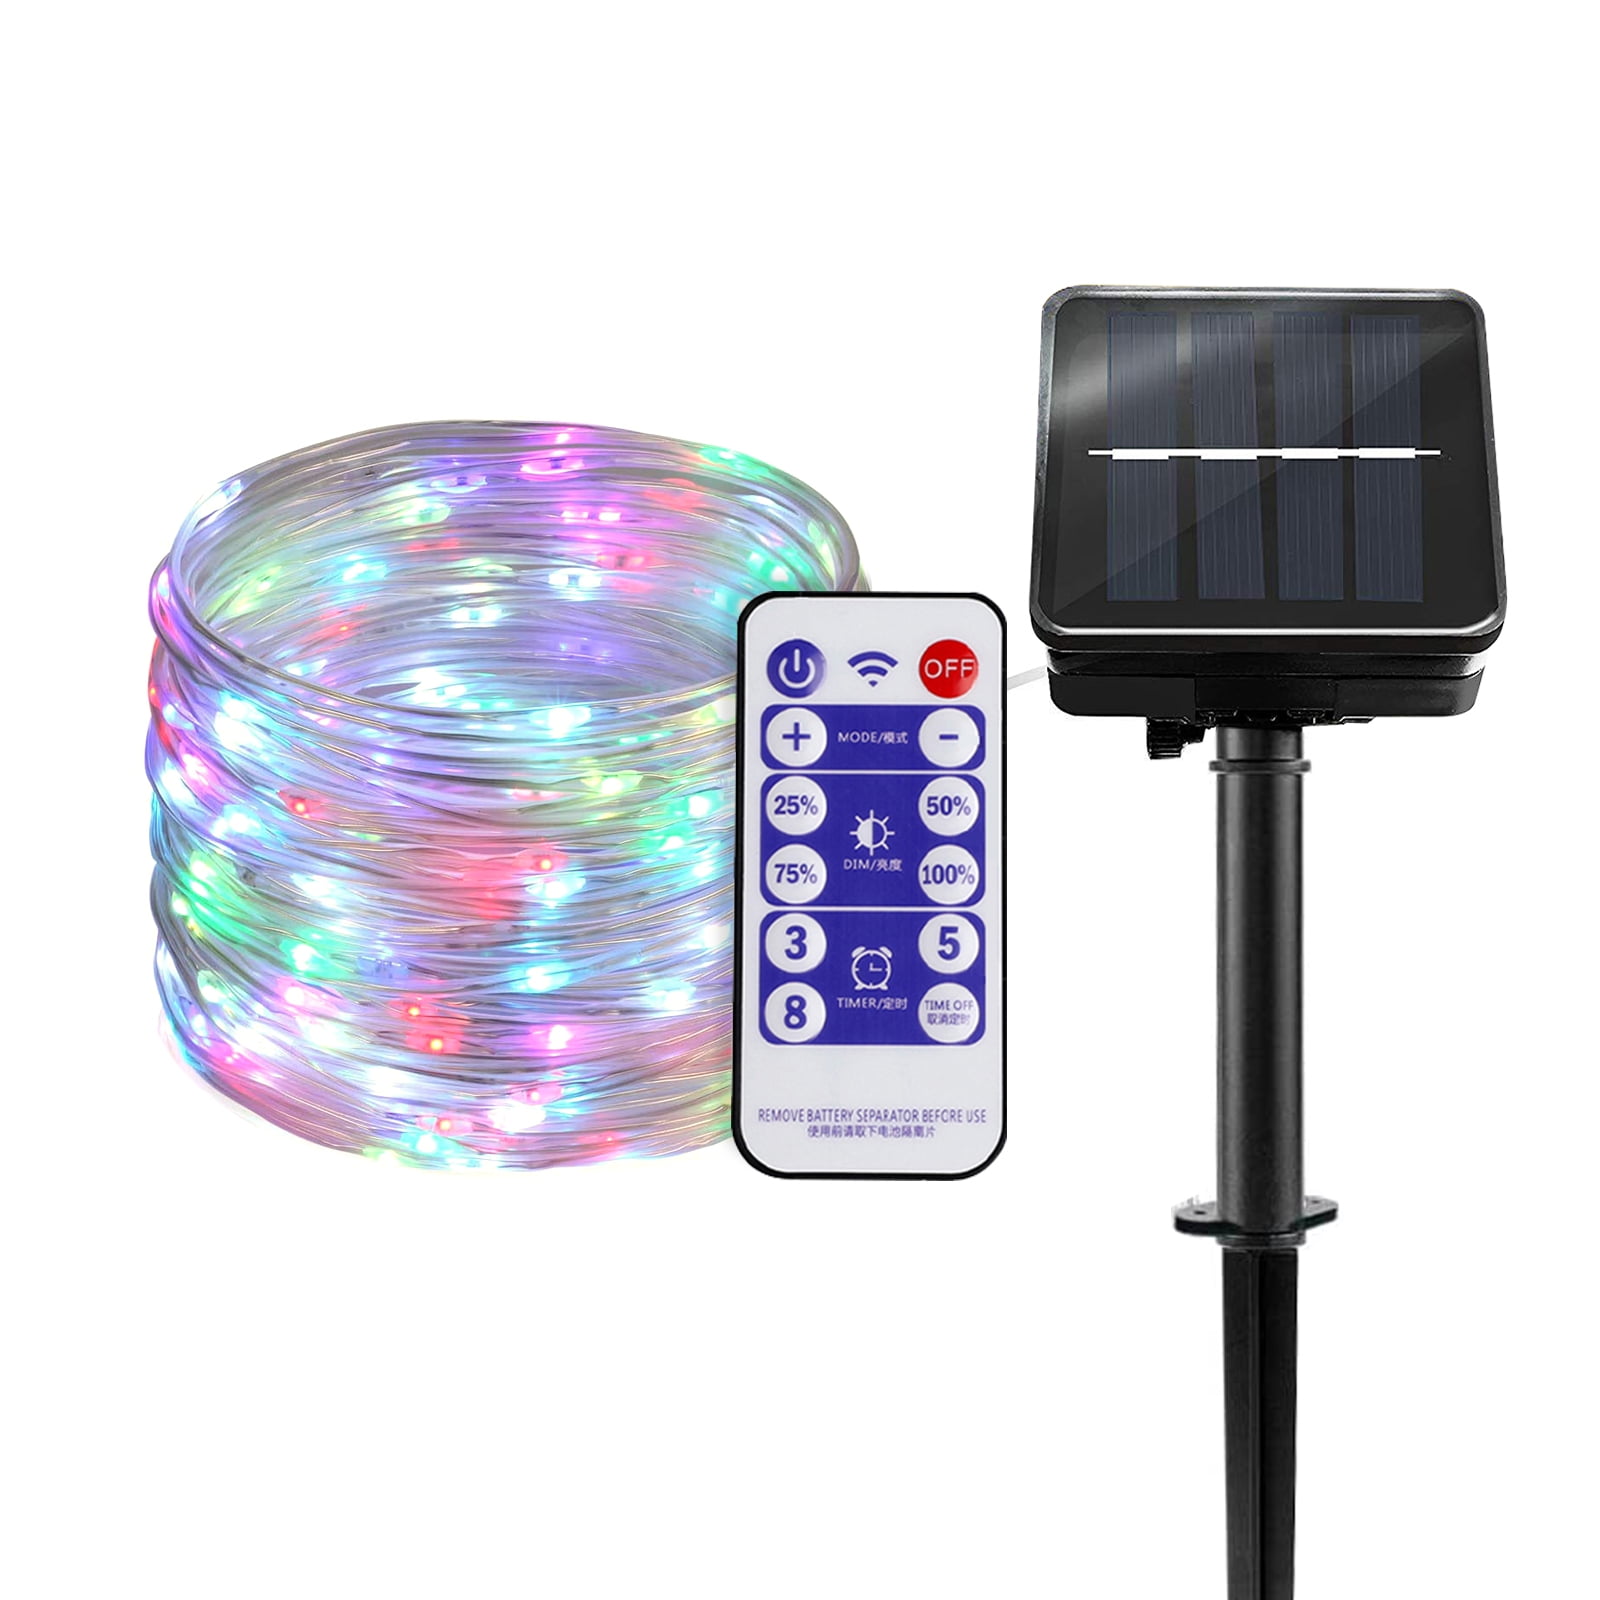 Solar LED Light Wire String Strip Rope Car Dance Party Controller 100 LED 8 mode 